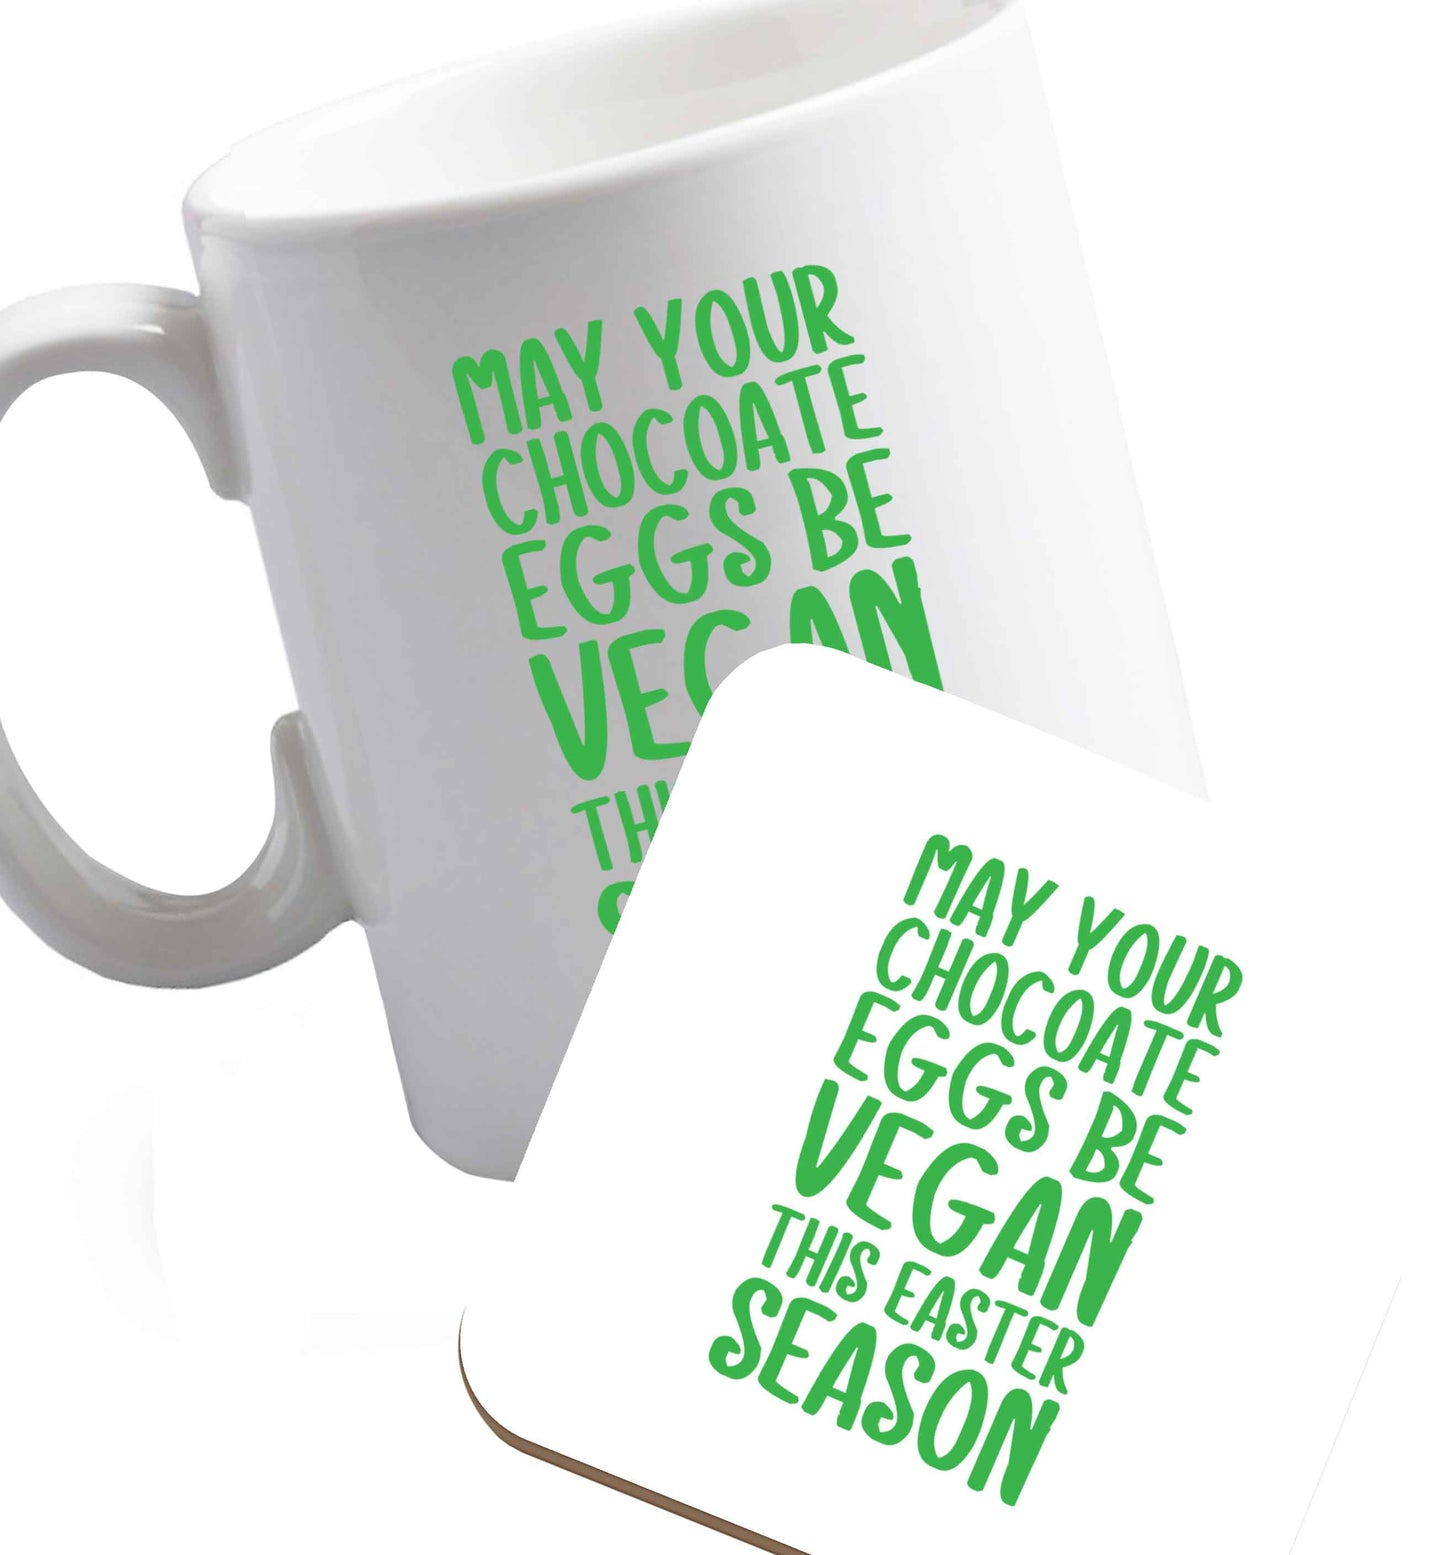 10 oz Easter bunny approved! Vegans will love this easter themed   ceramic mug and coaster set right handed